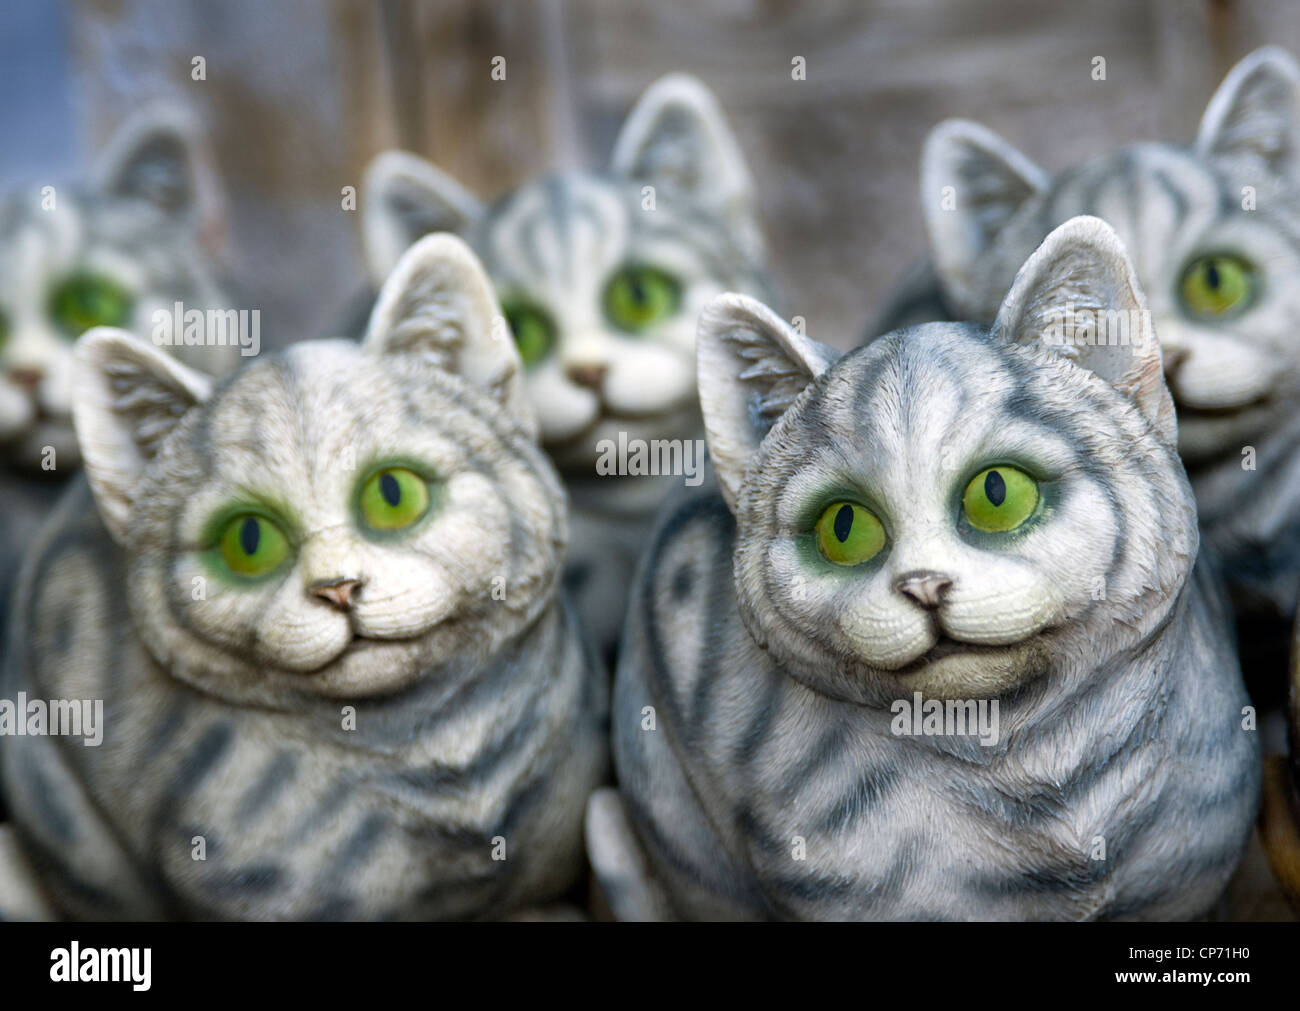 Garden ornaments in the form of kittens. Stock Photo